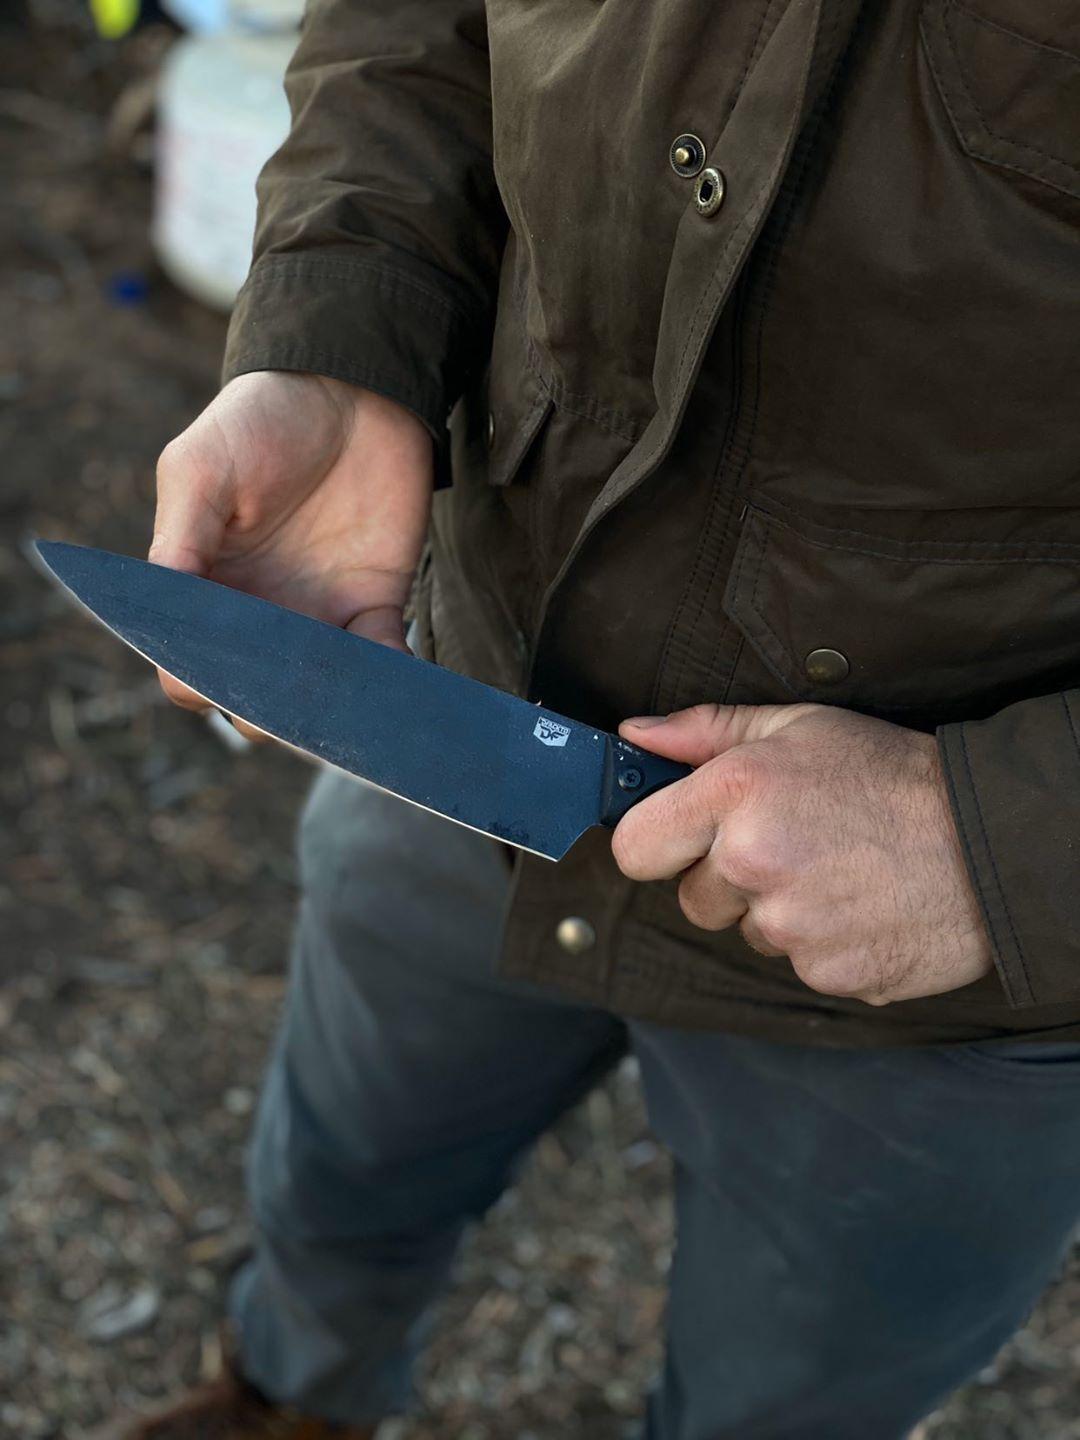 DFACKTO Chef Knife in hand while camping